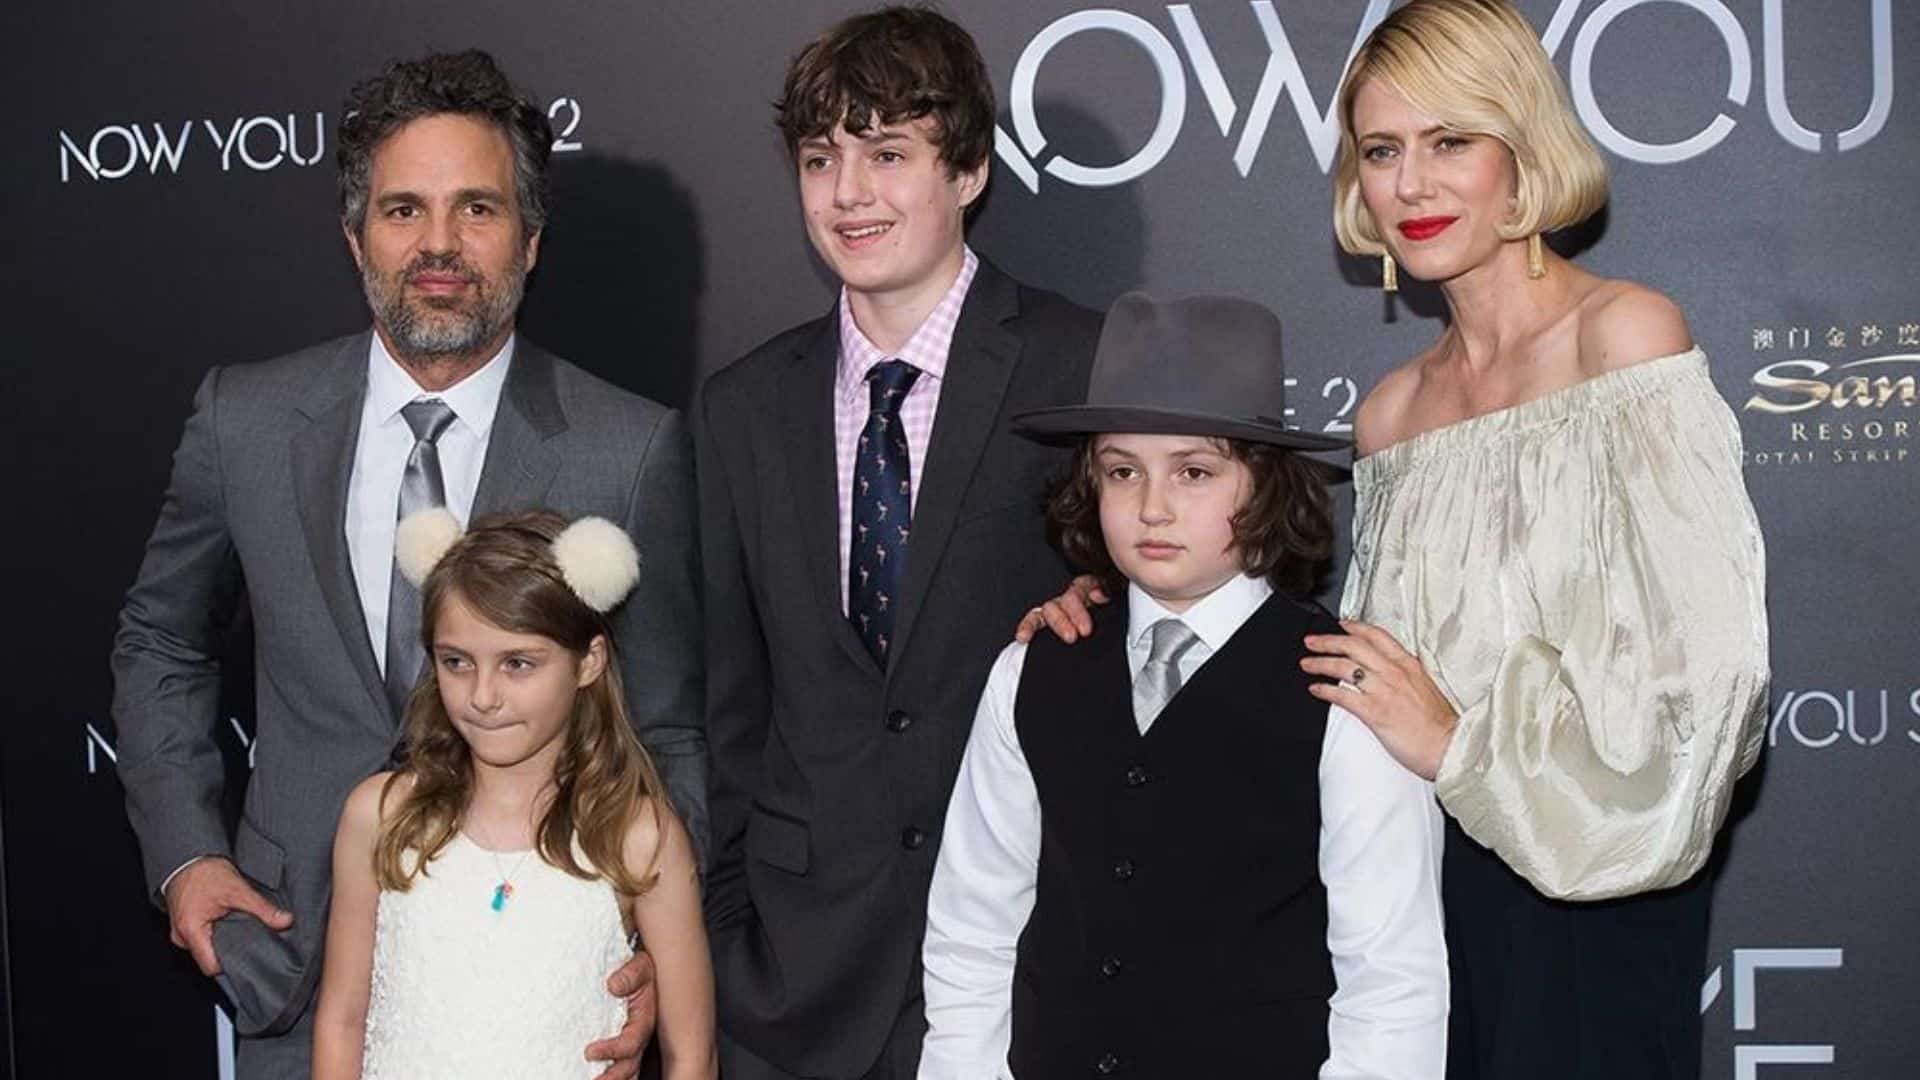 Odette Ruffalo Bio: How’s Life for Mark Ruffalo’s Youngest?